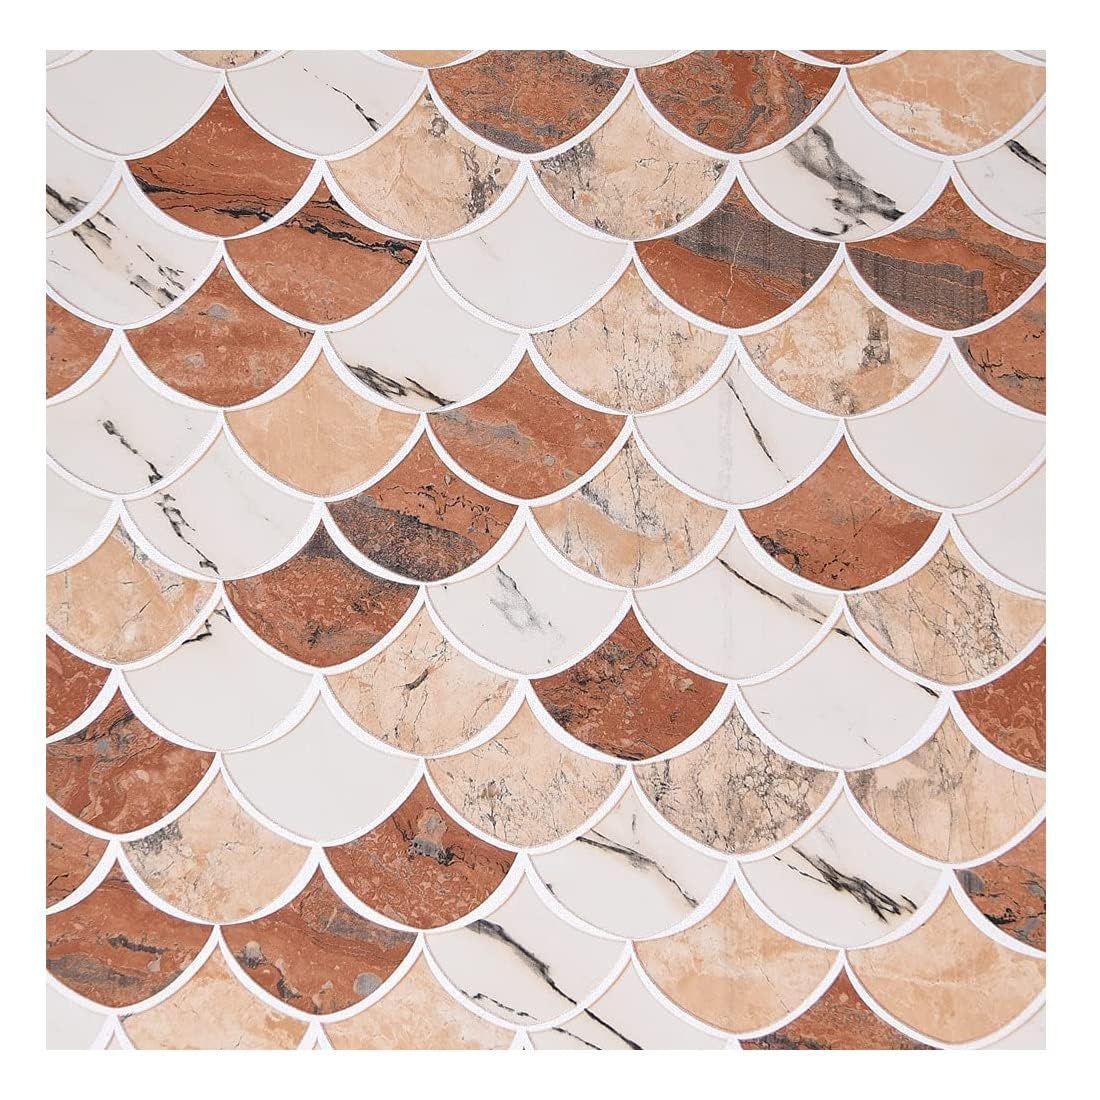 3D Latest Semi-Circle Design White & Brown Wallpaper Roll for Home Walls 57 Sq Ft (0.53m or 33 Feet)